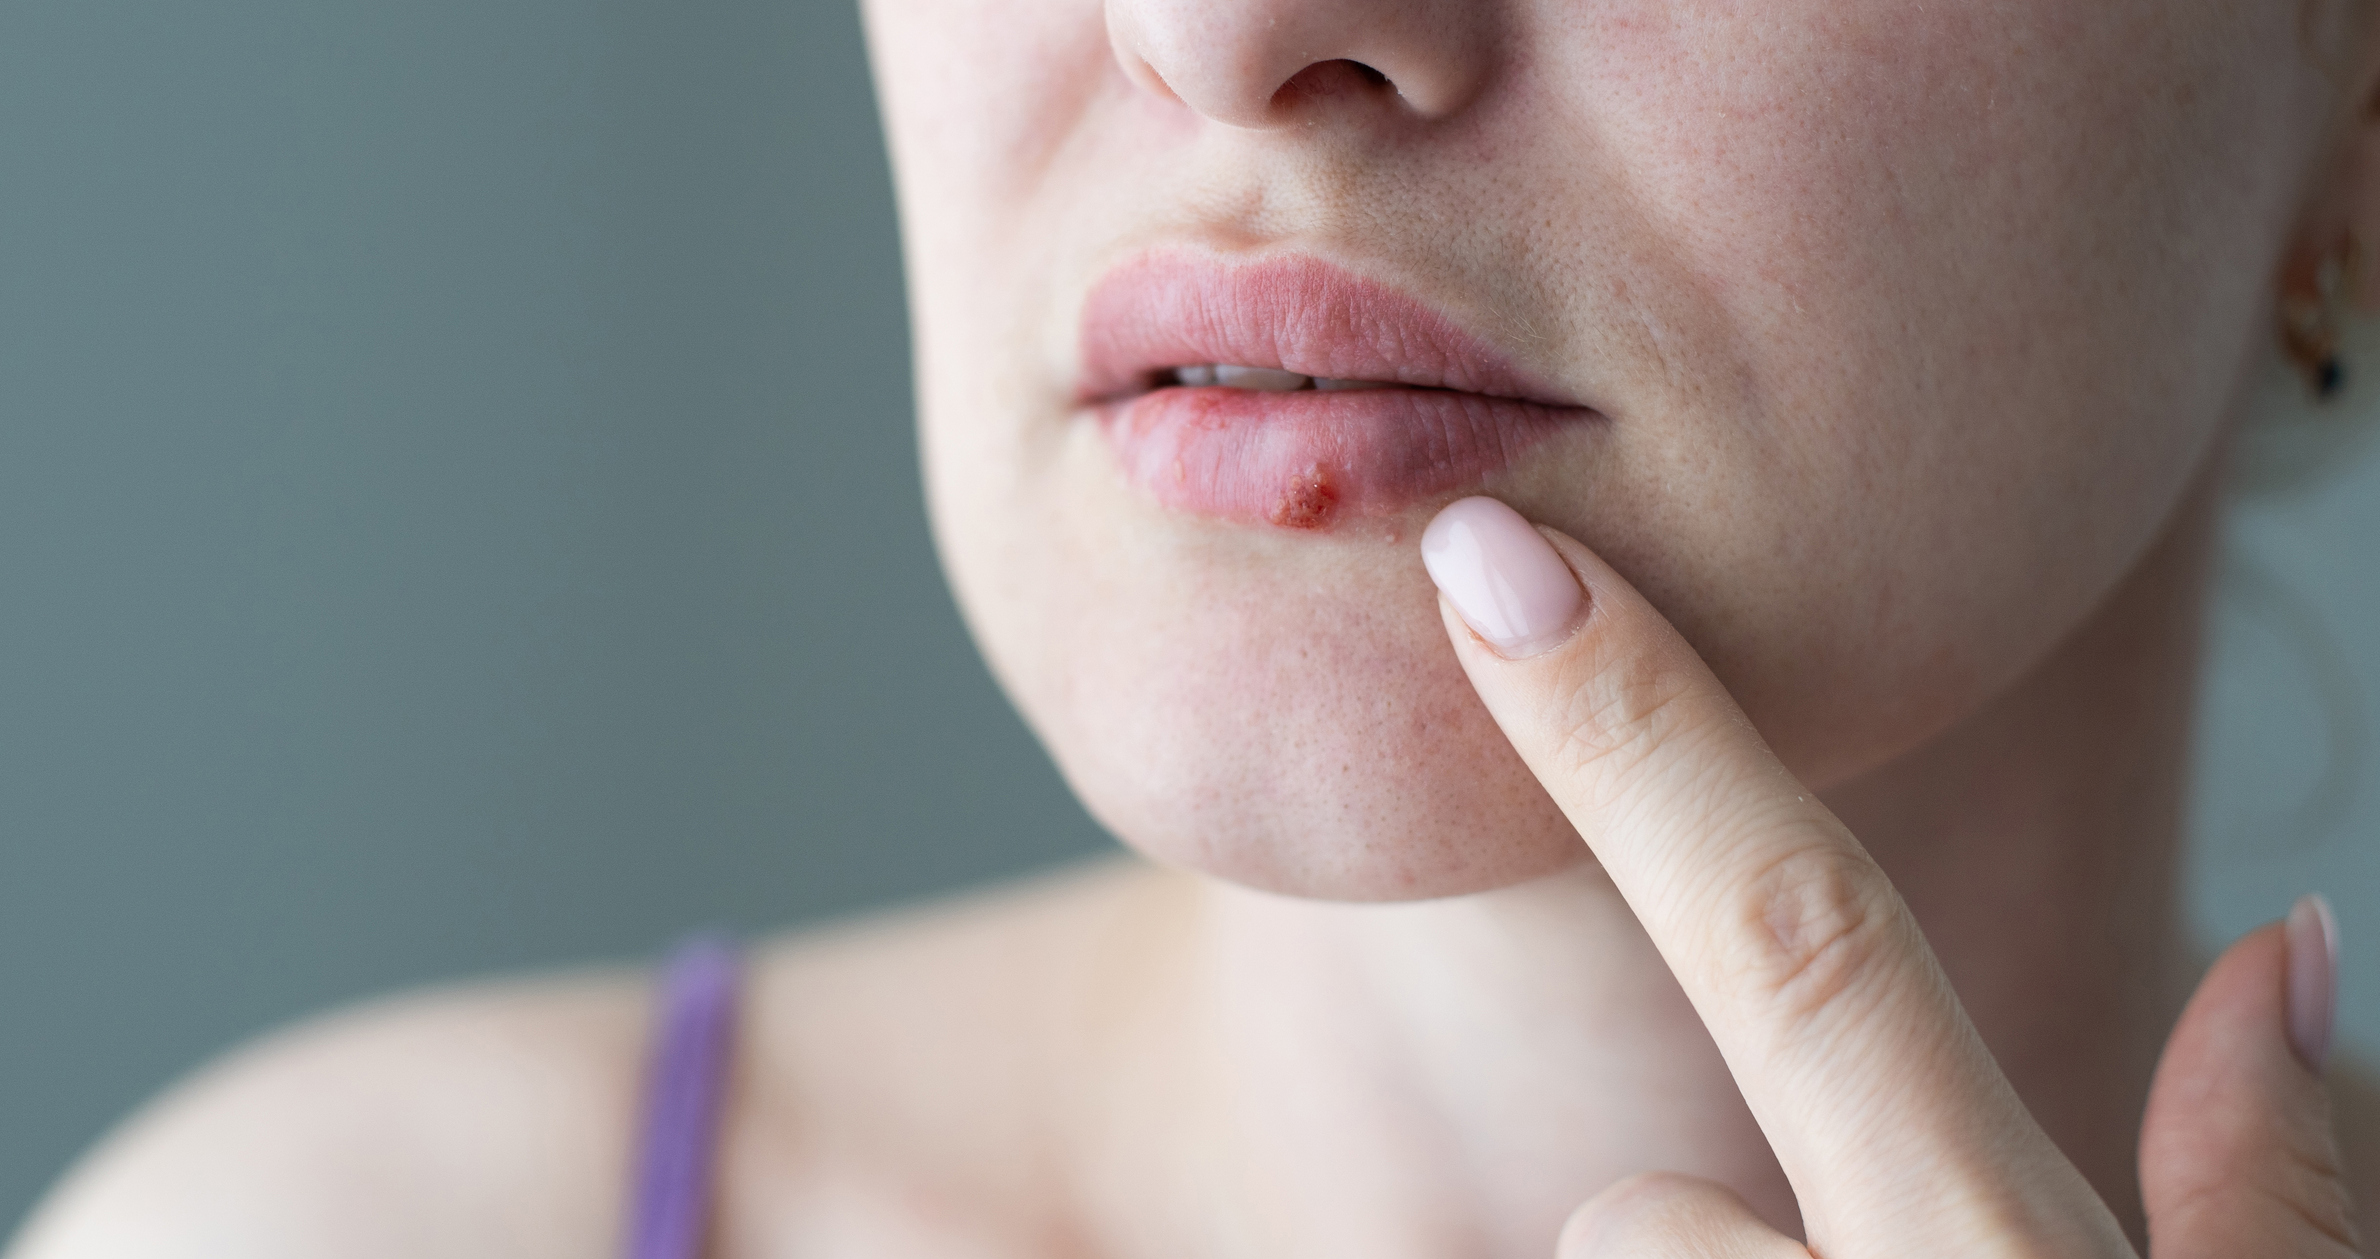 About our cold sore treatment at Park Avenue Dental Care